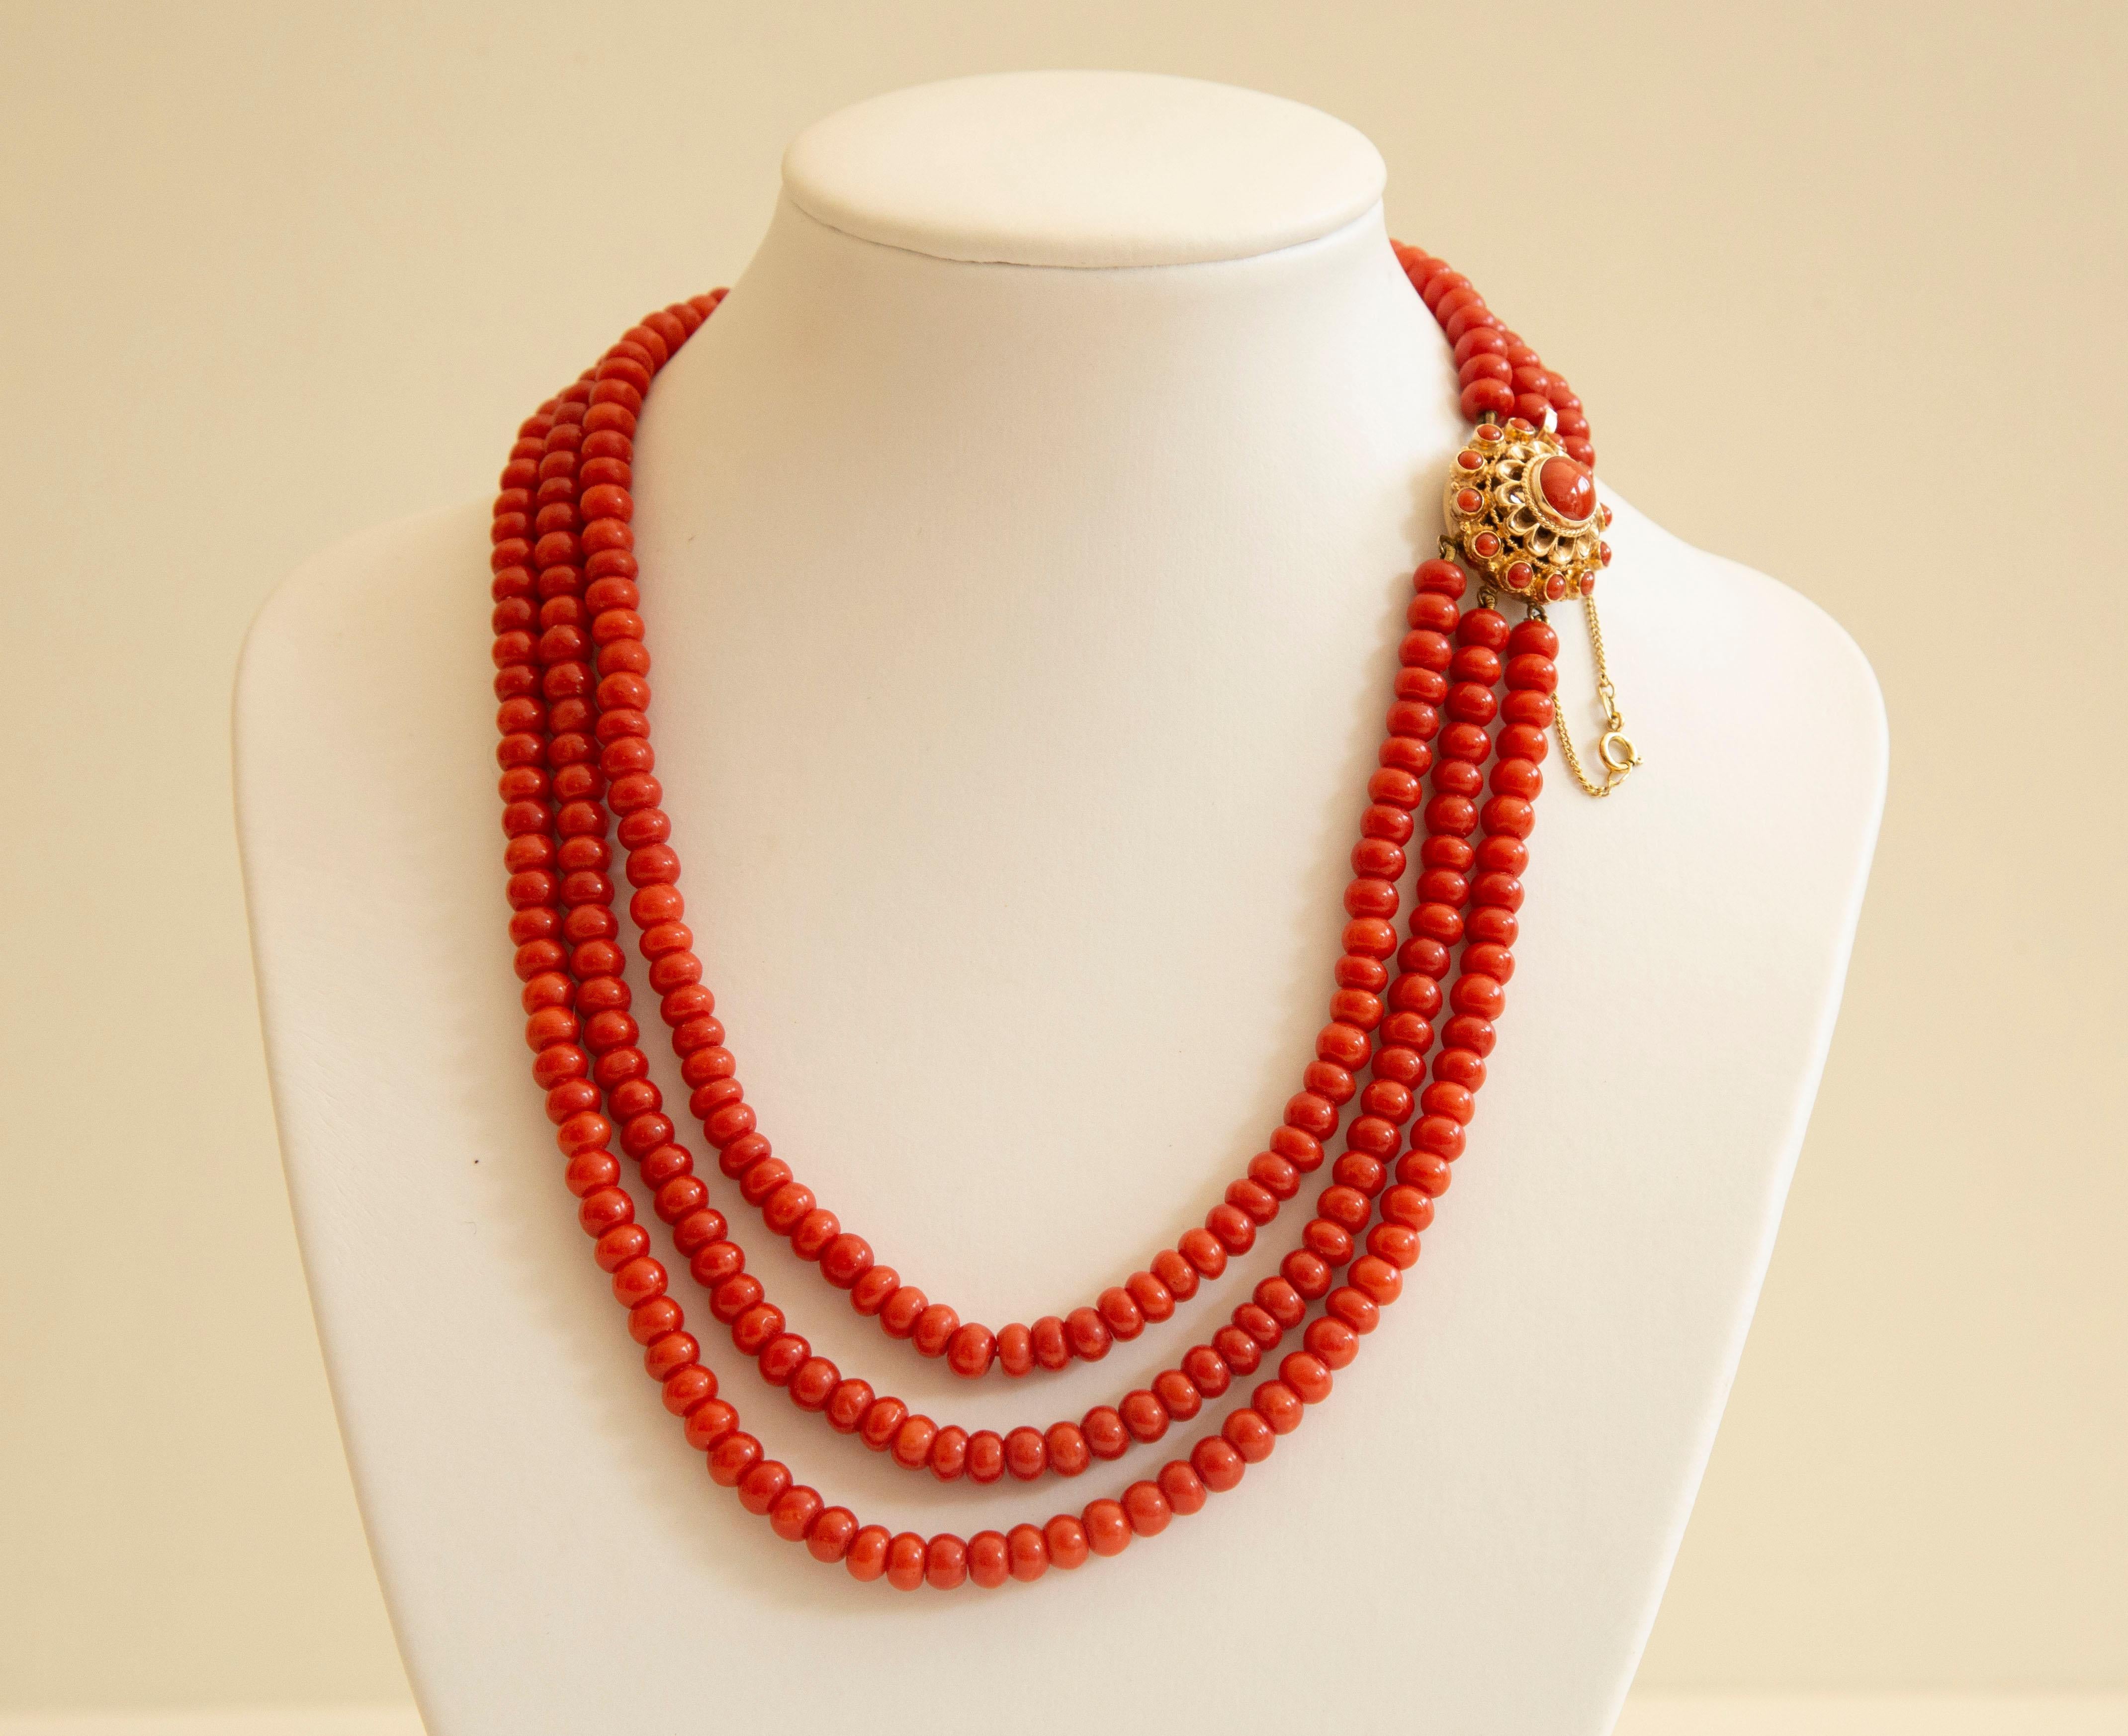 An antique 3-row natural red coral  (Corallium Rubrum*) choker necklace with round filigree 14 karat yellow clasp, from ca. 1945, the Netherlands. The beads have a round and regular shape. The size of the beads is CA. 5 mm in diameter. The clasp